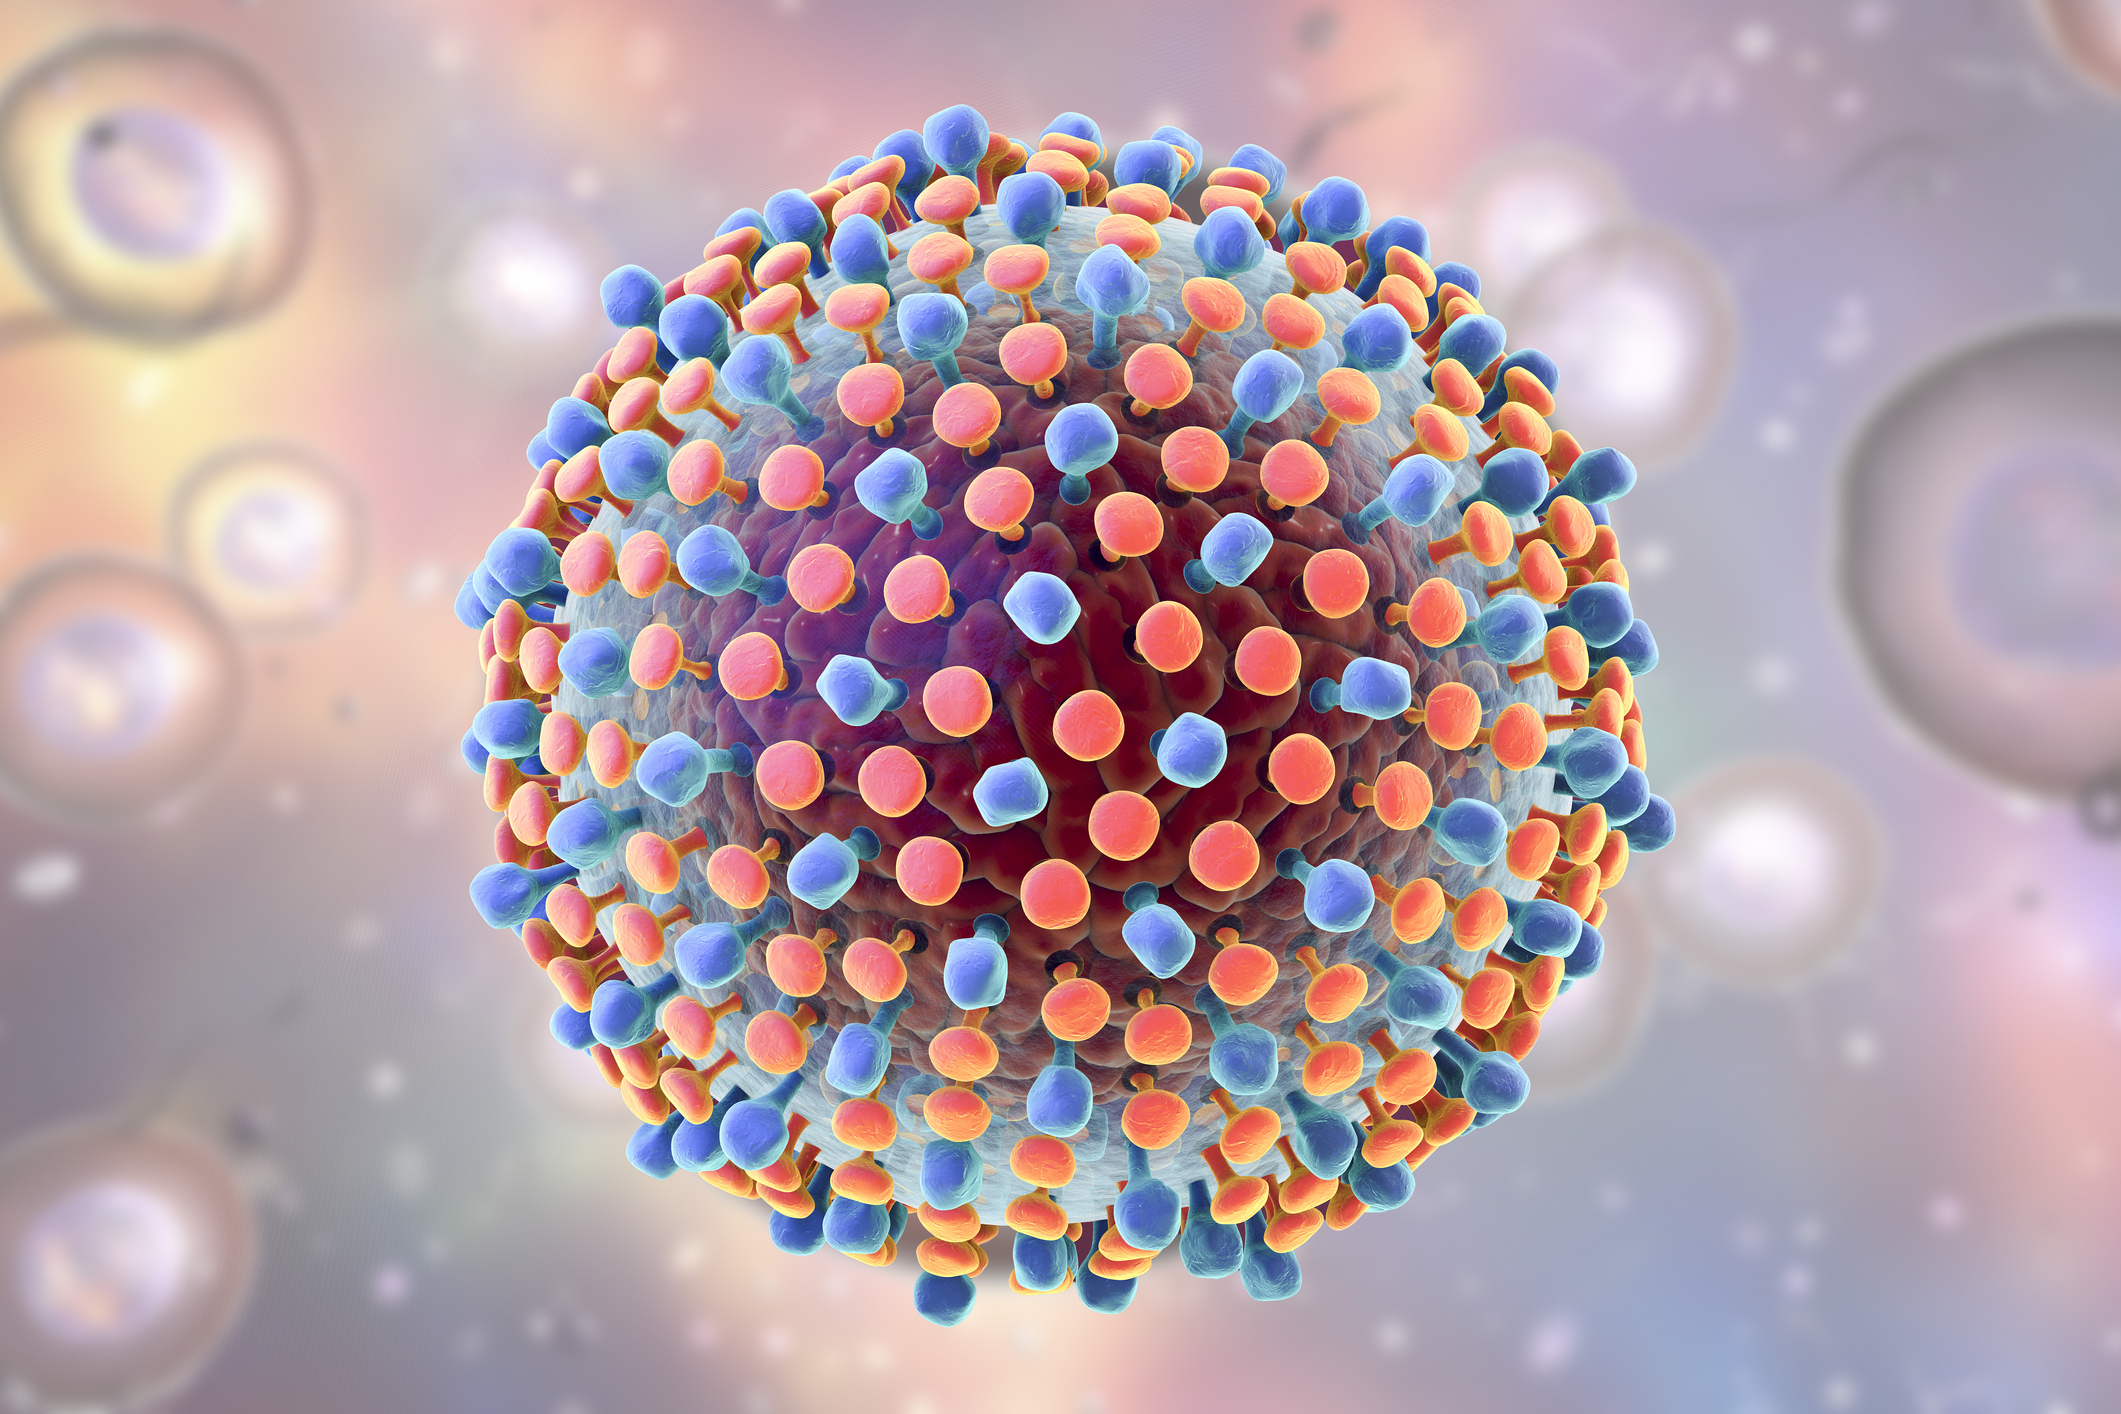 Its absolutely feasible to eliminate hepatitis C. Heres how.